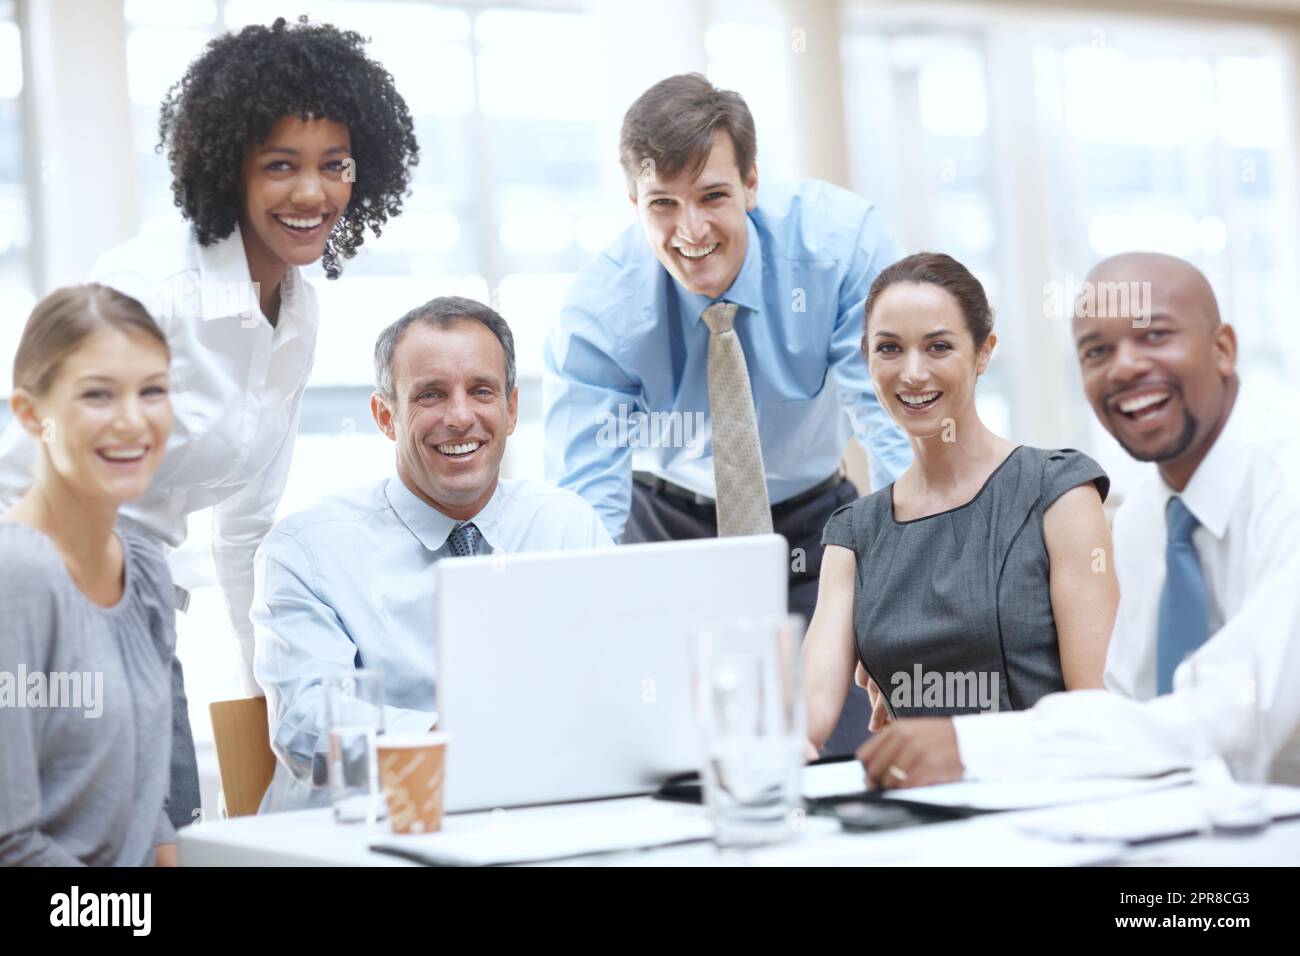 Theyre a successful business team. Portrait of a multi-ethnic group of businesspeople in a meeting. Stock Photo